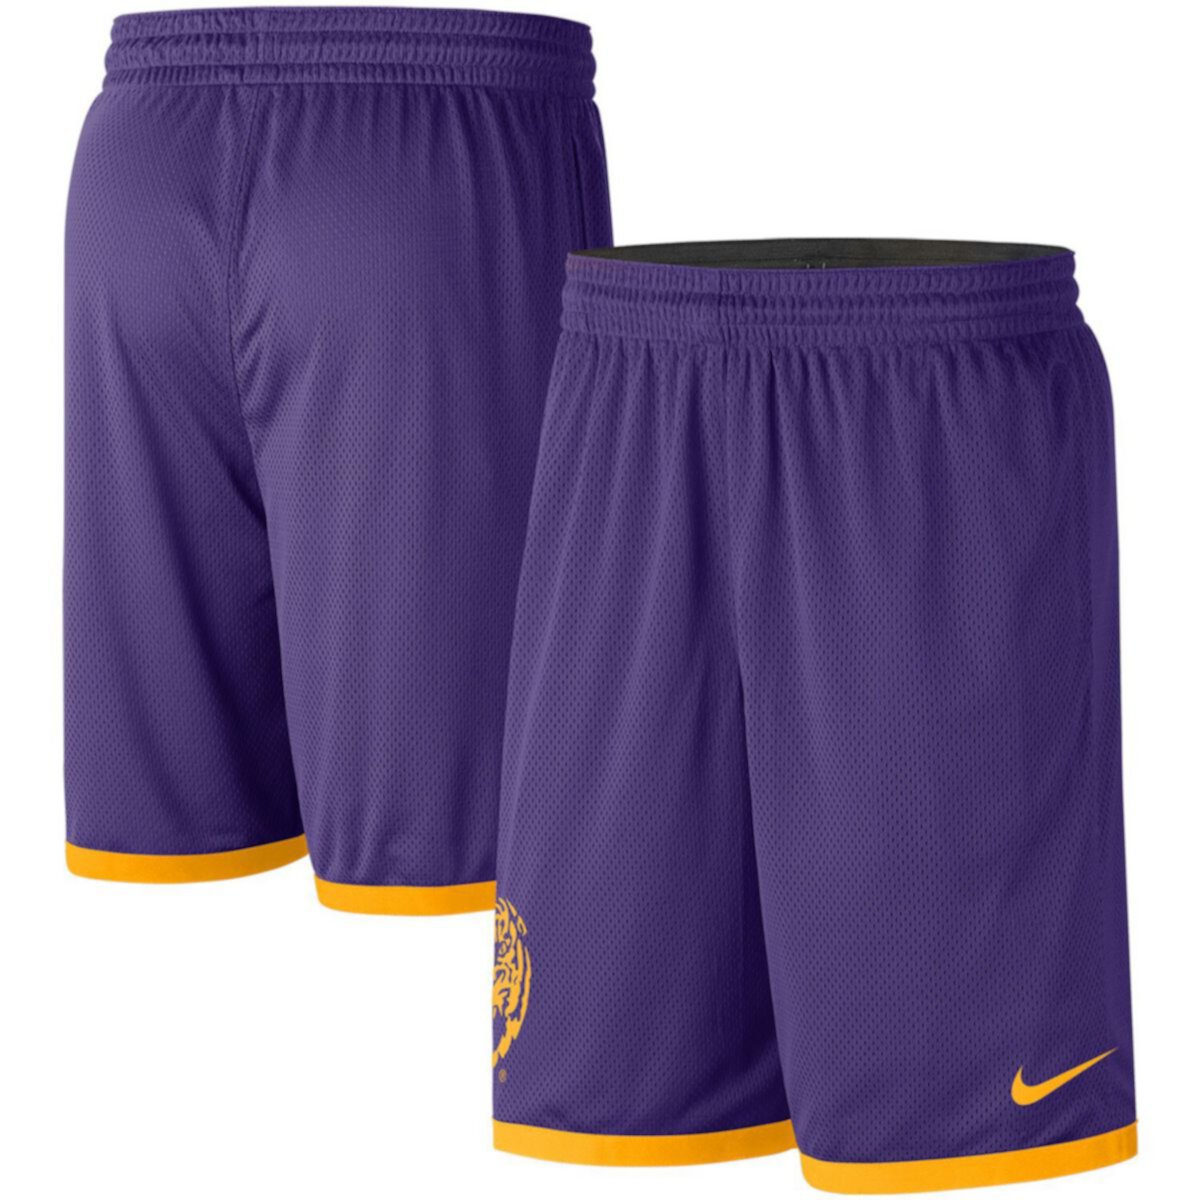 Nike men's lsu tigers antracite fly knit football shorts dicks